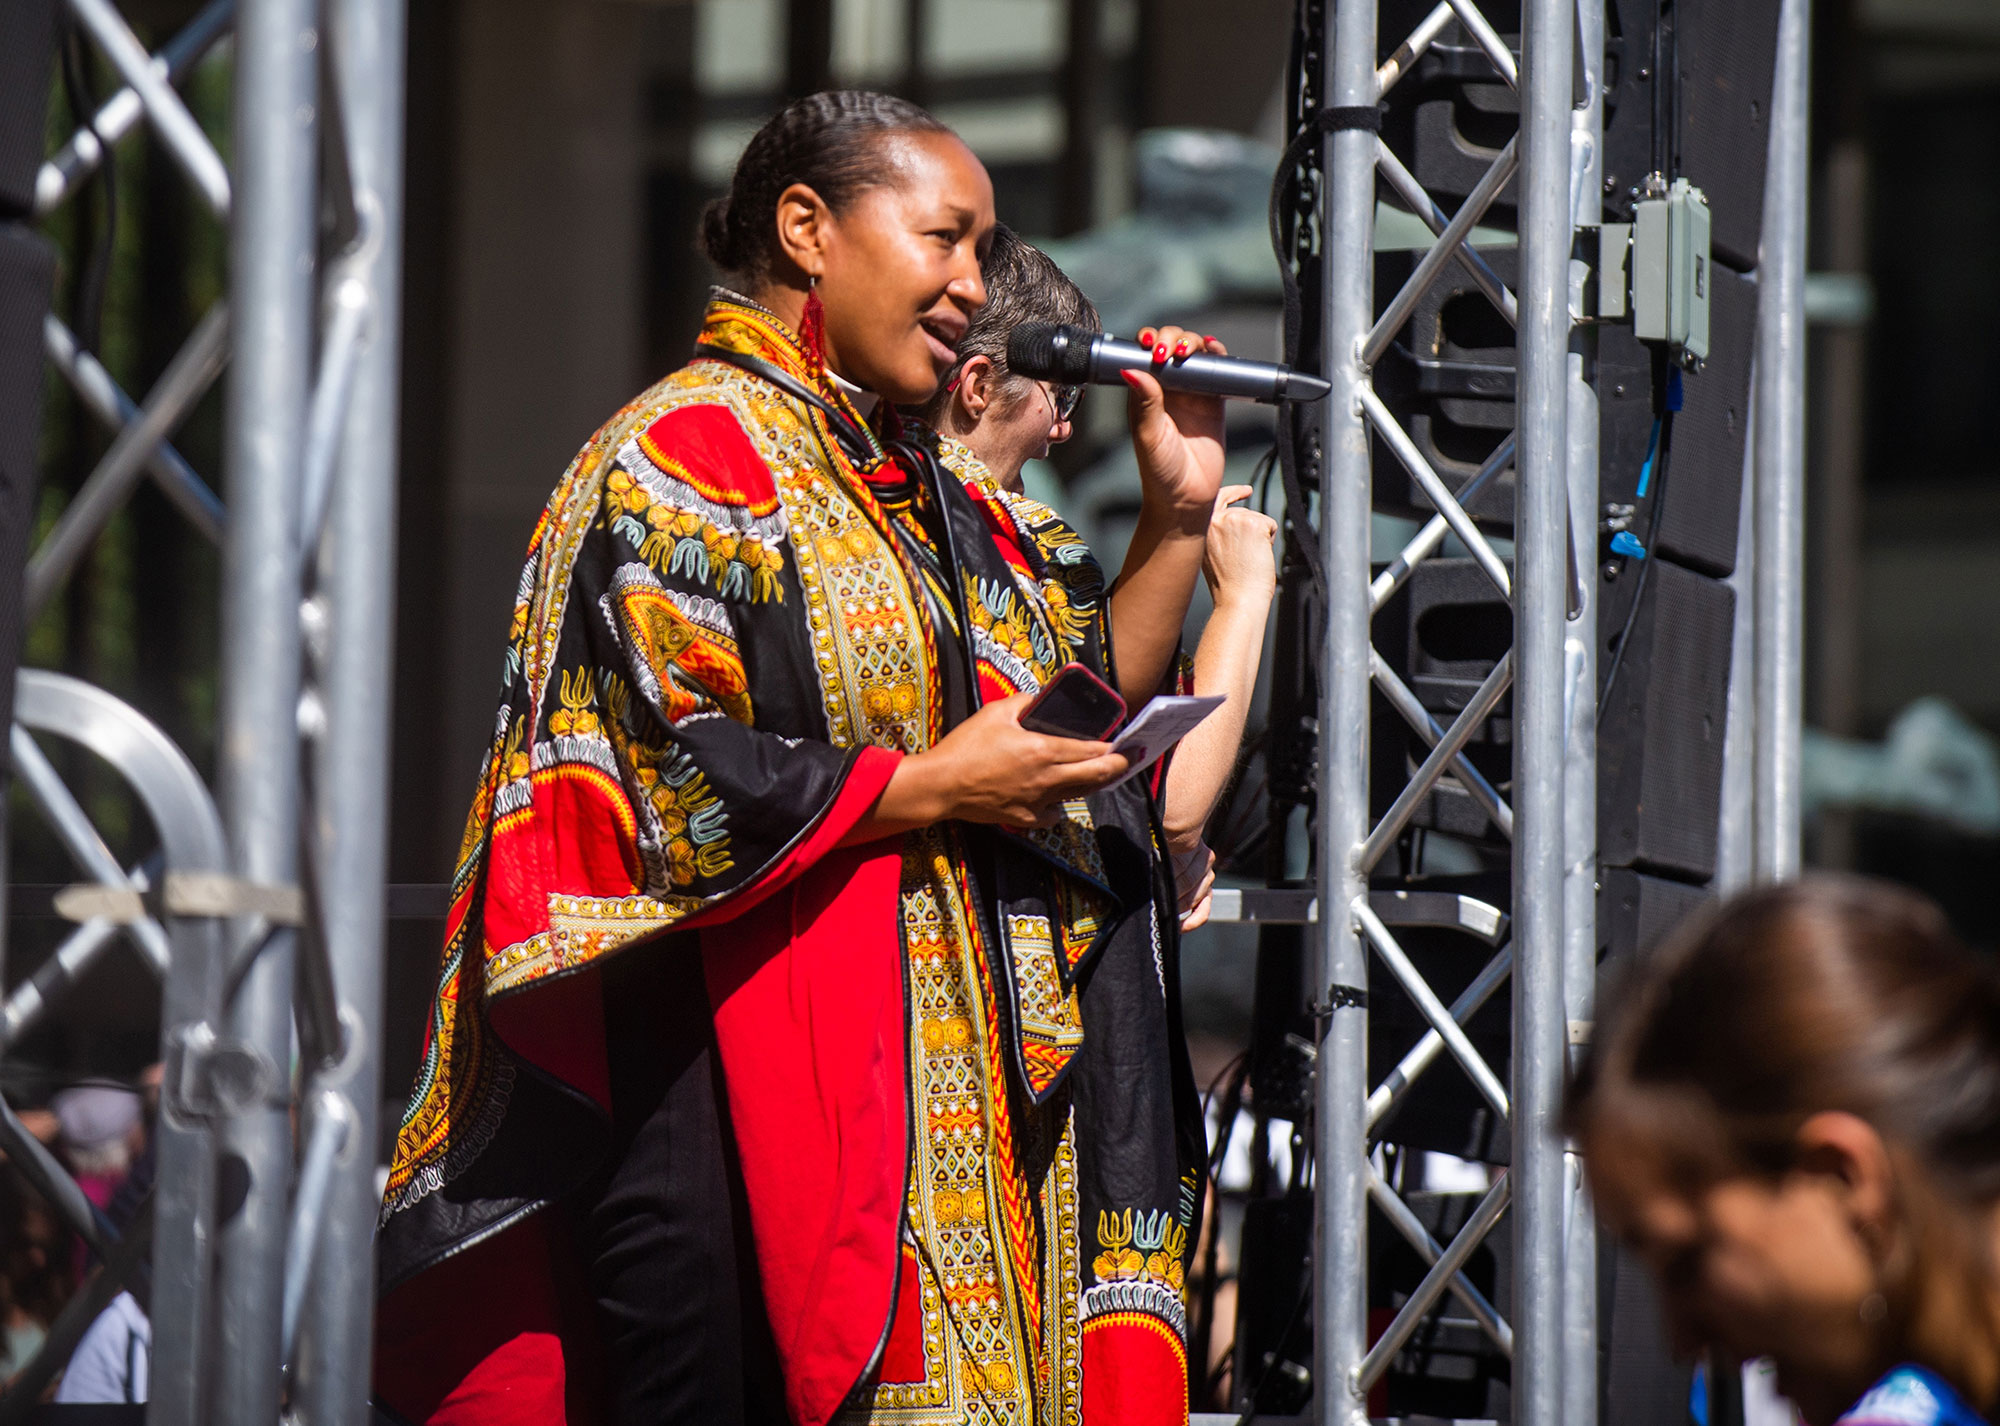 Rev. Mariama White Hammond speaks during the Youth Climate Strike at City Hall Plaza in Boston on September 20, 2019.